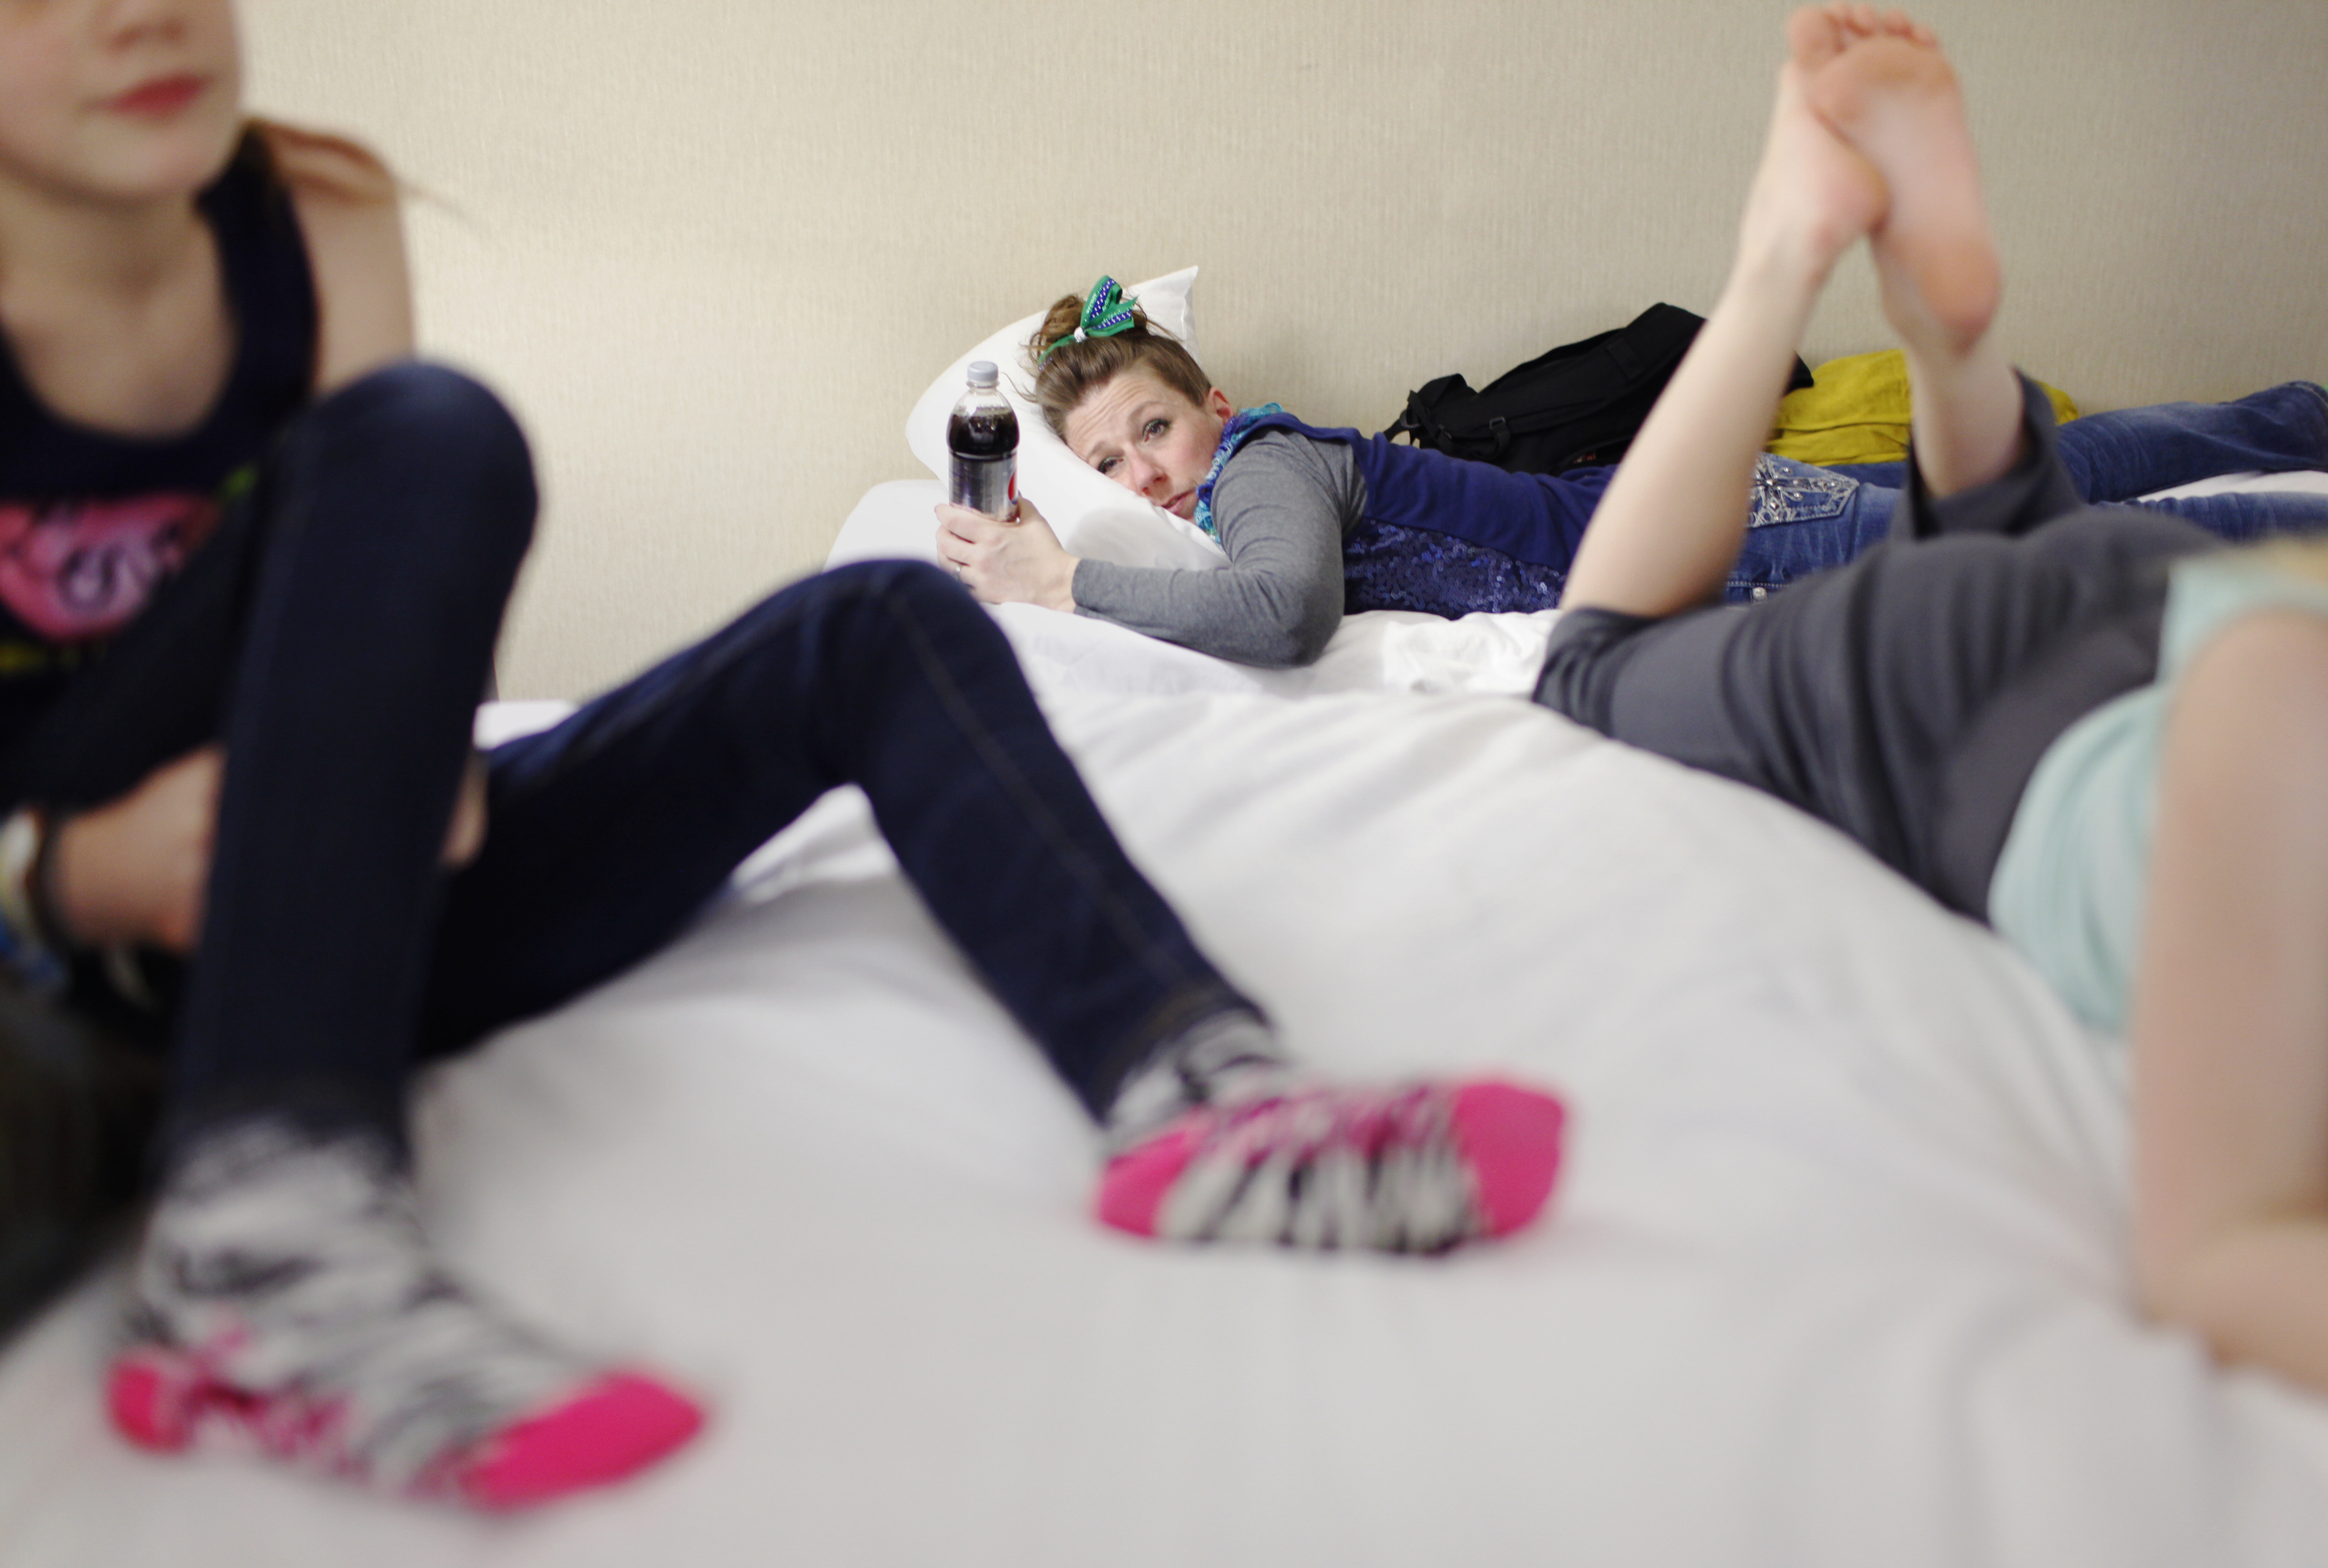 Jennifer Holfeltz, 40, rests following a 13-hour day of varsity cheerleading in Buffalo, NY, on March 1, 2014. Three of her daughters cheer competitively. "They eat, breathe, and sleep this," she commented. Photo by Niki Walker